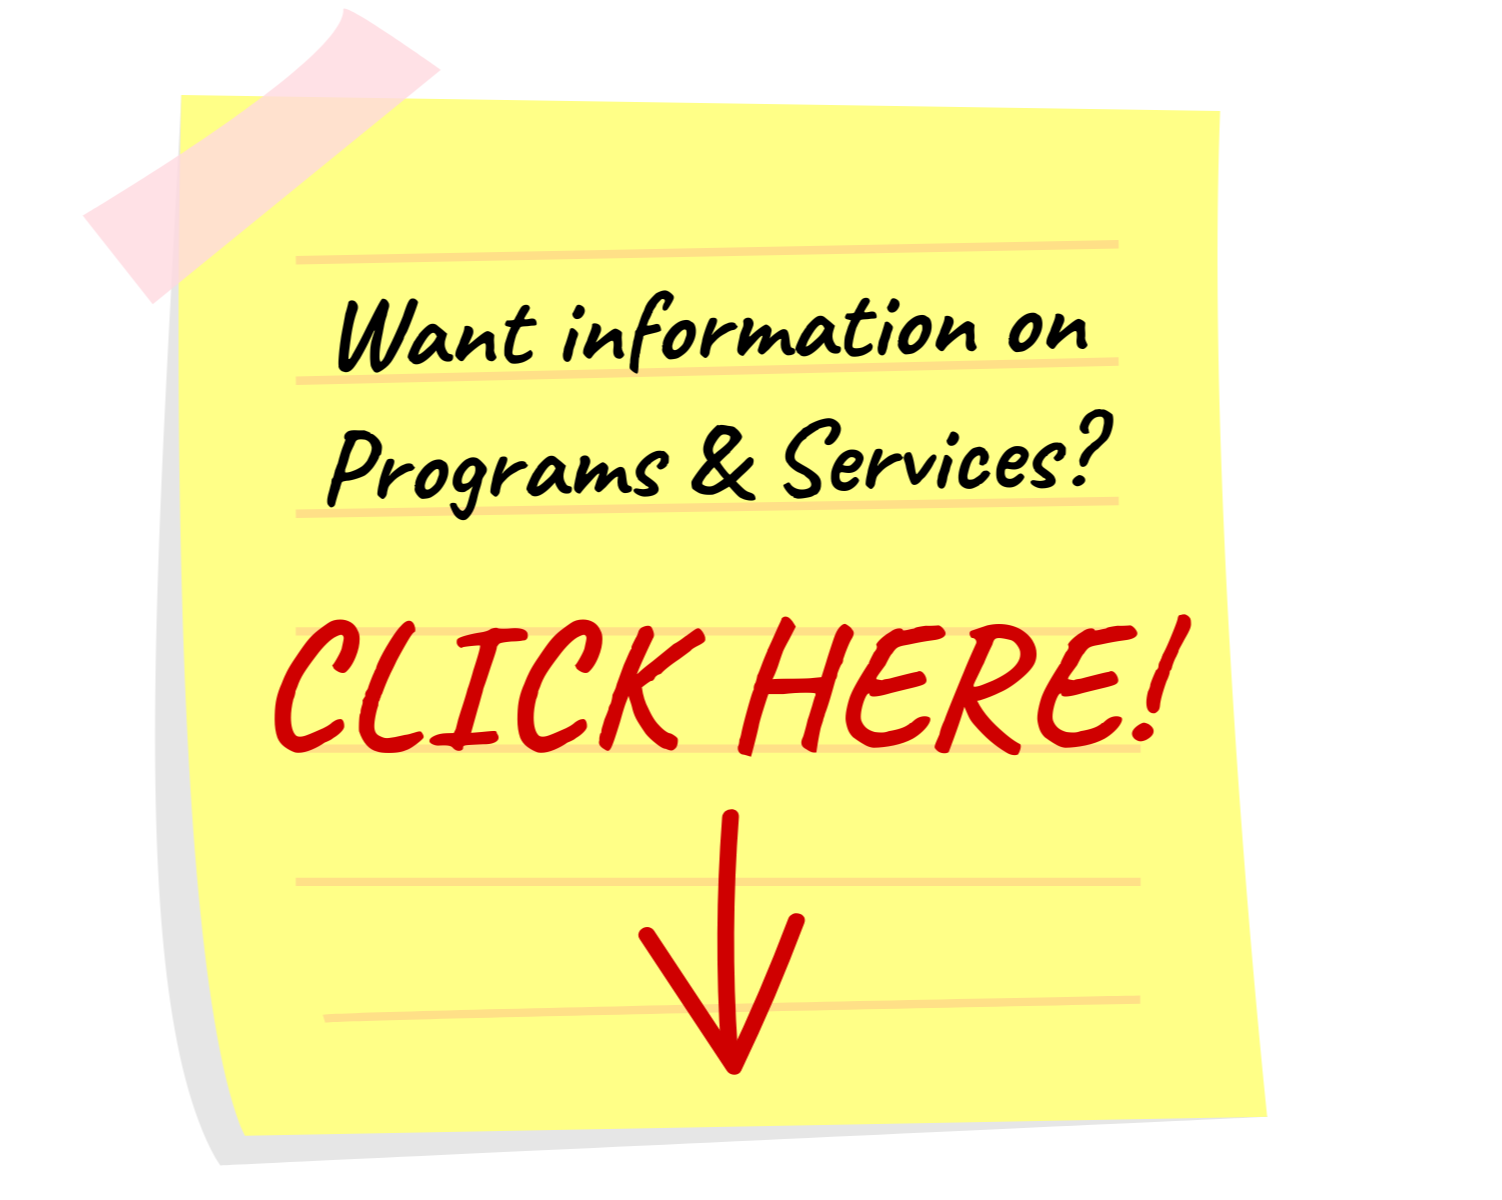 Want information on programs & services? CLICK HERE!  Arrow